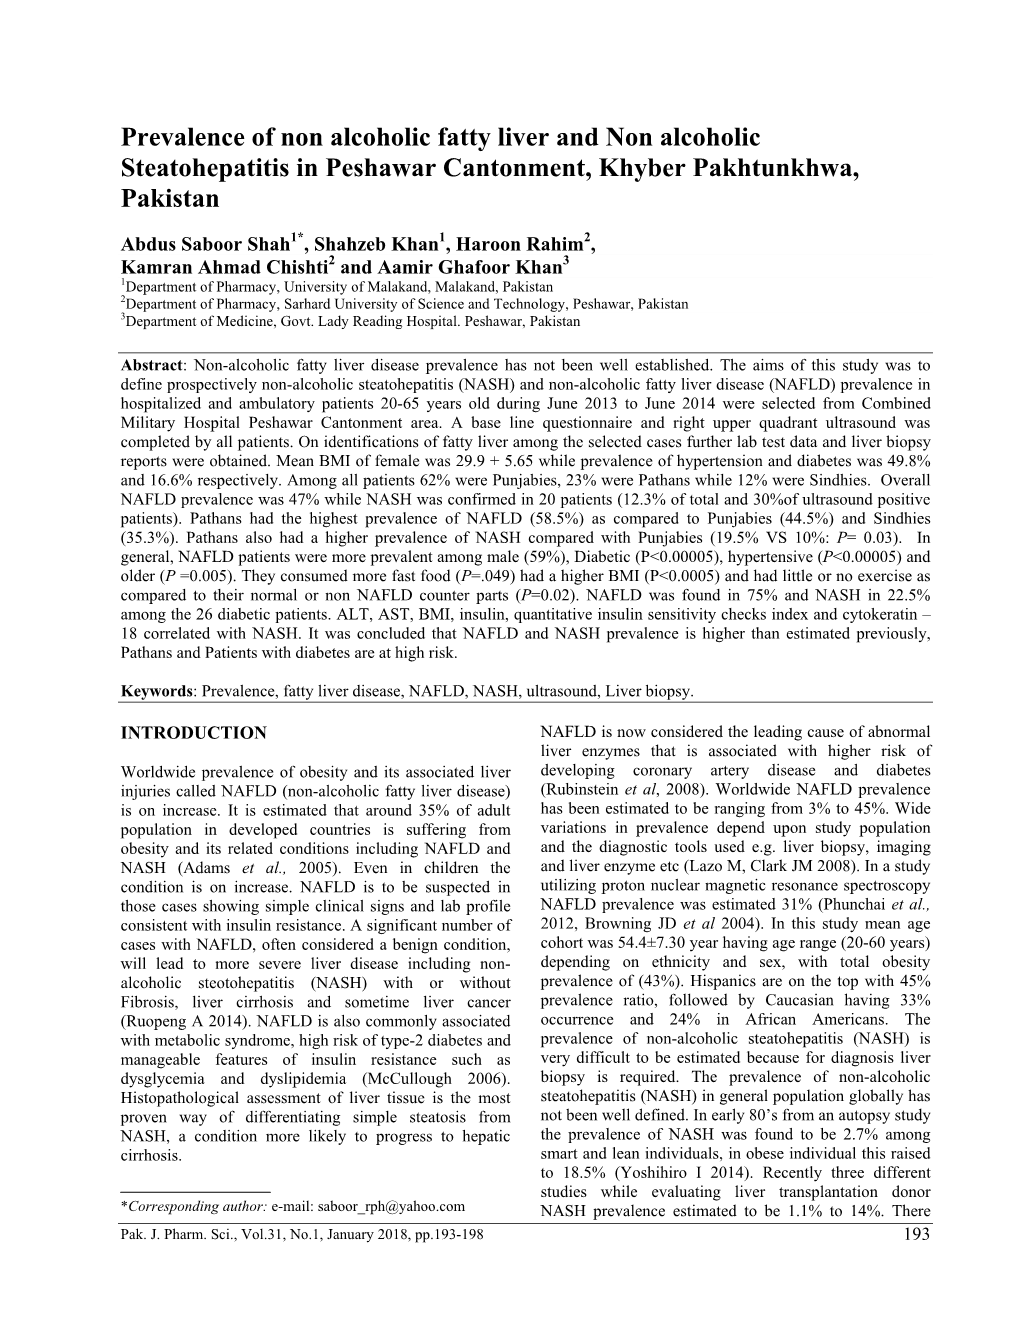 Prevalence of Non Alcoholic Fatty Liver and Non Alcoholic Steatohepatitis in Peshawar Cantonment, Khyber Pakhtunkhwa, Pakistan